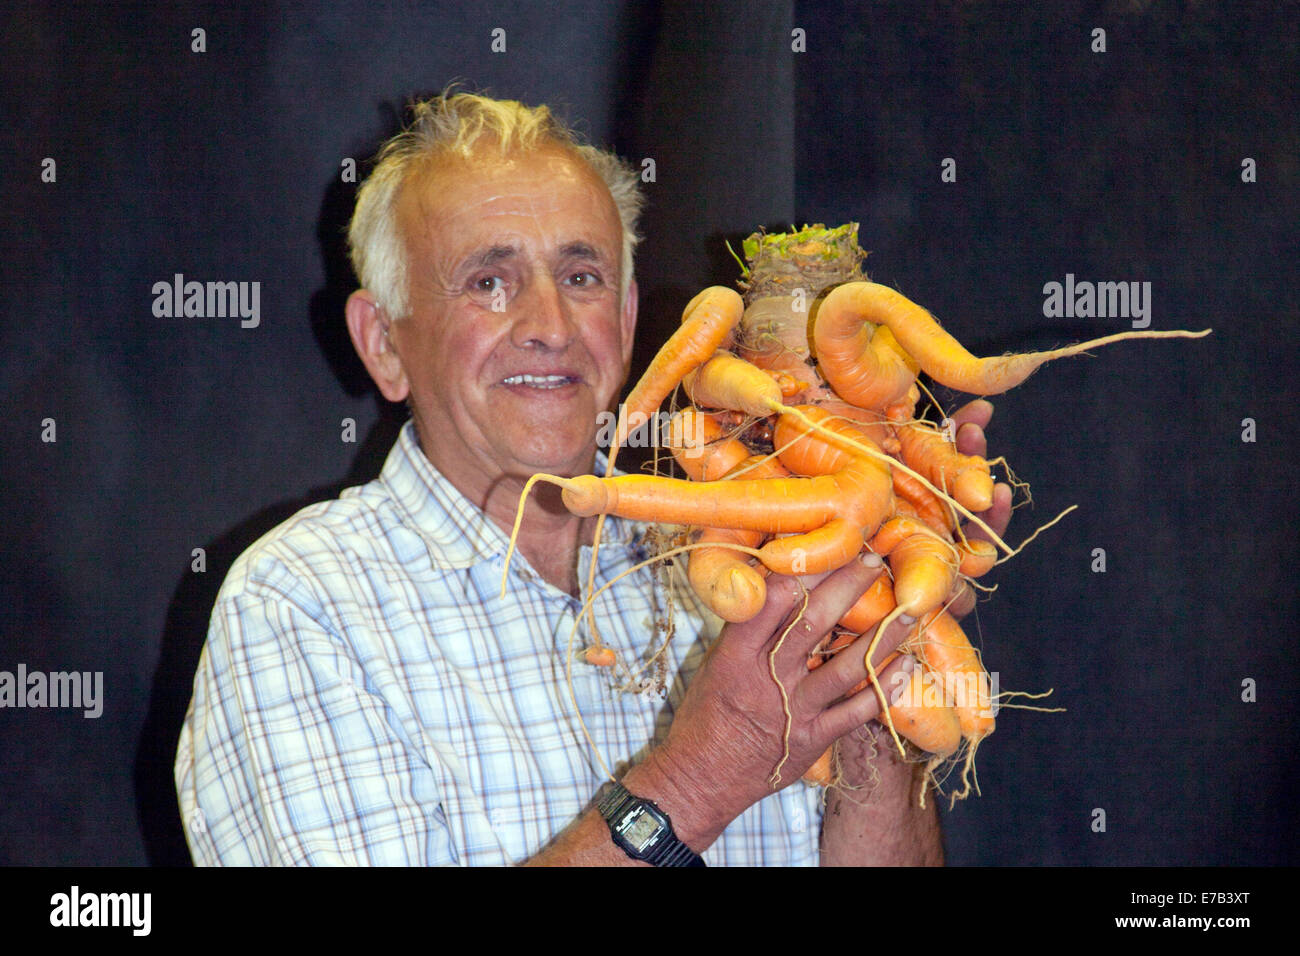 Harrogate, Yorkshire, UK. 11th Sept, 2014.  Ian Neale with Giant Vegetable a deformed, misshapen, malformed, distorted, crooked, irregular, misproportioned, ill-proportioned, ill-shaped, ugly carrot at the  Annual Autumn Flower Show. Attractions include the giant vegetable competition, is ranked as one of Britain's top three gardening events.  New for 2014 is Inspiration Street, a series of small gardens set against the backdrop of a traditional street scene. The Avenue will offer beautiful, larger scale gardens, plus a new Community Spirit feature with ‘message in a garden’ designs from com Stock Photo